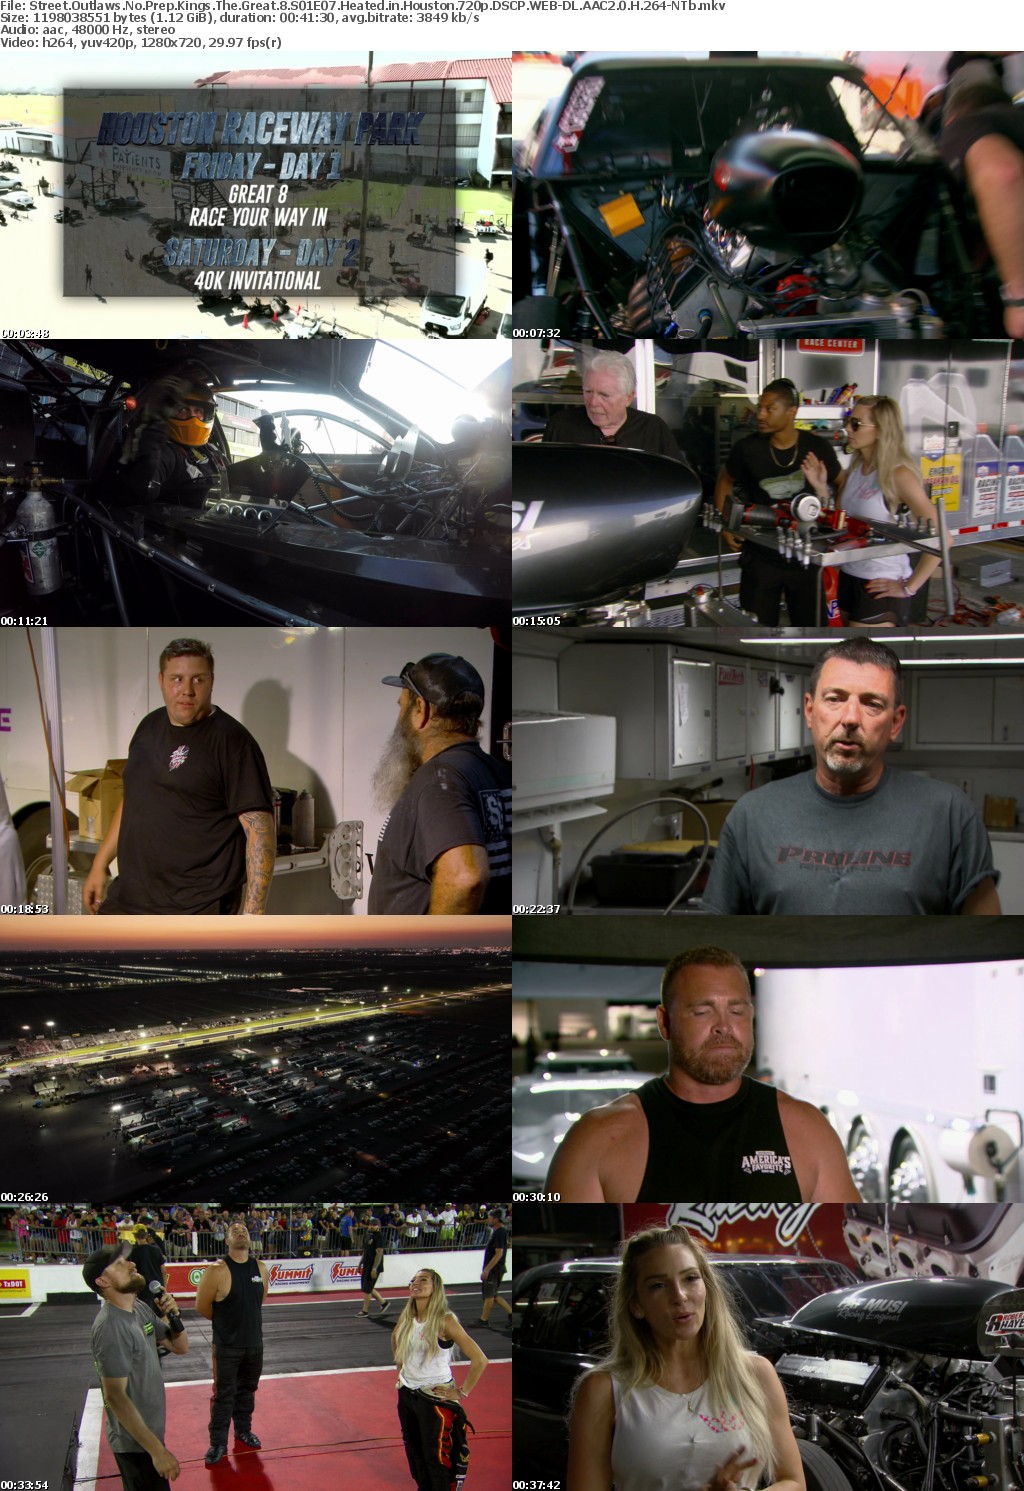 Street Outlaws No Prep Kings The Great 8 S01E07 Heated in Houston 720p DSCP WEB-DL AAC2 0 H 264-NTb